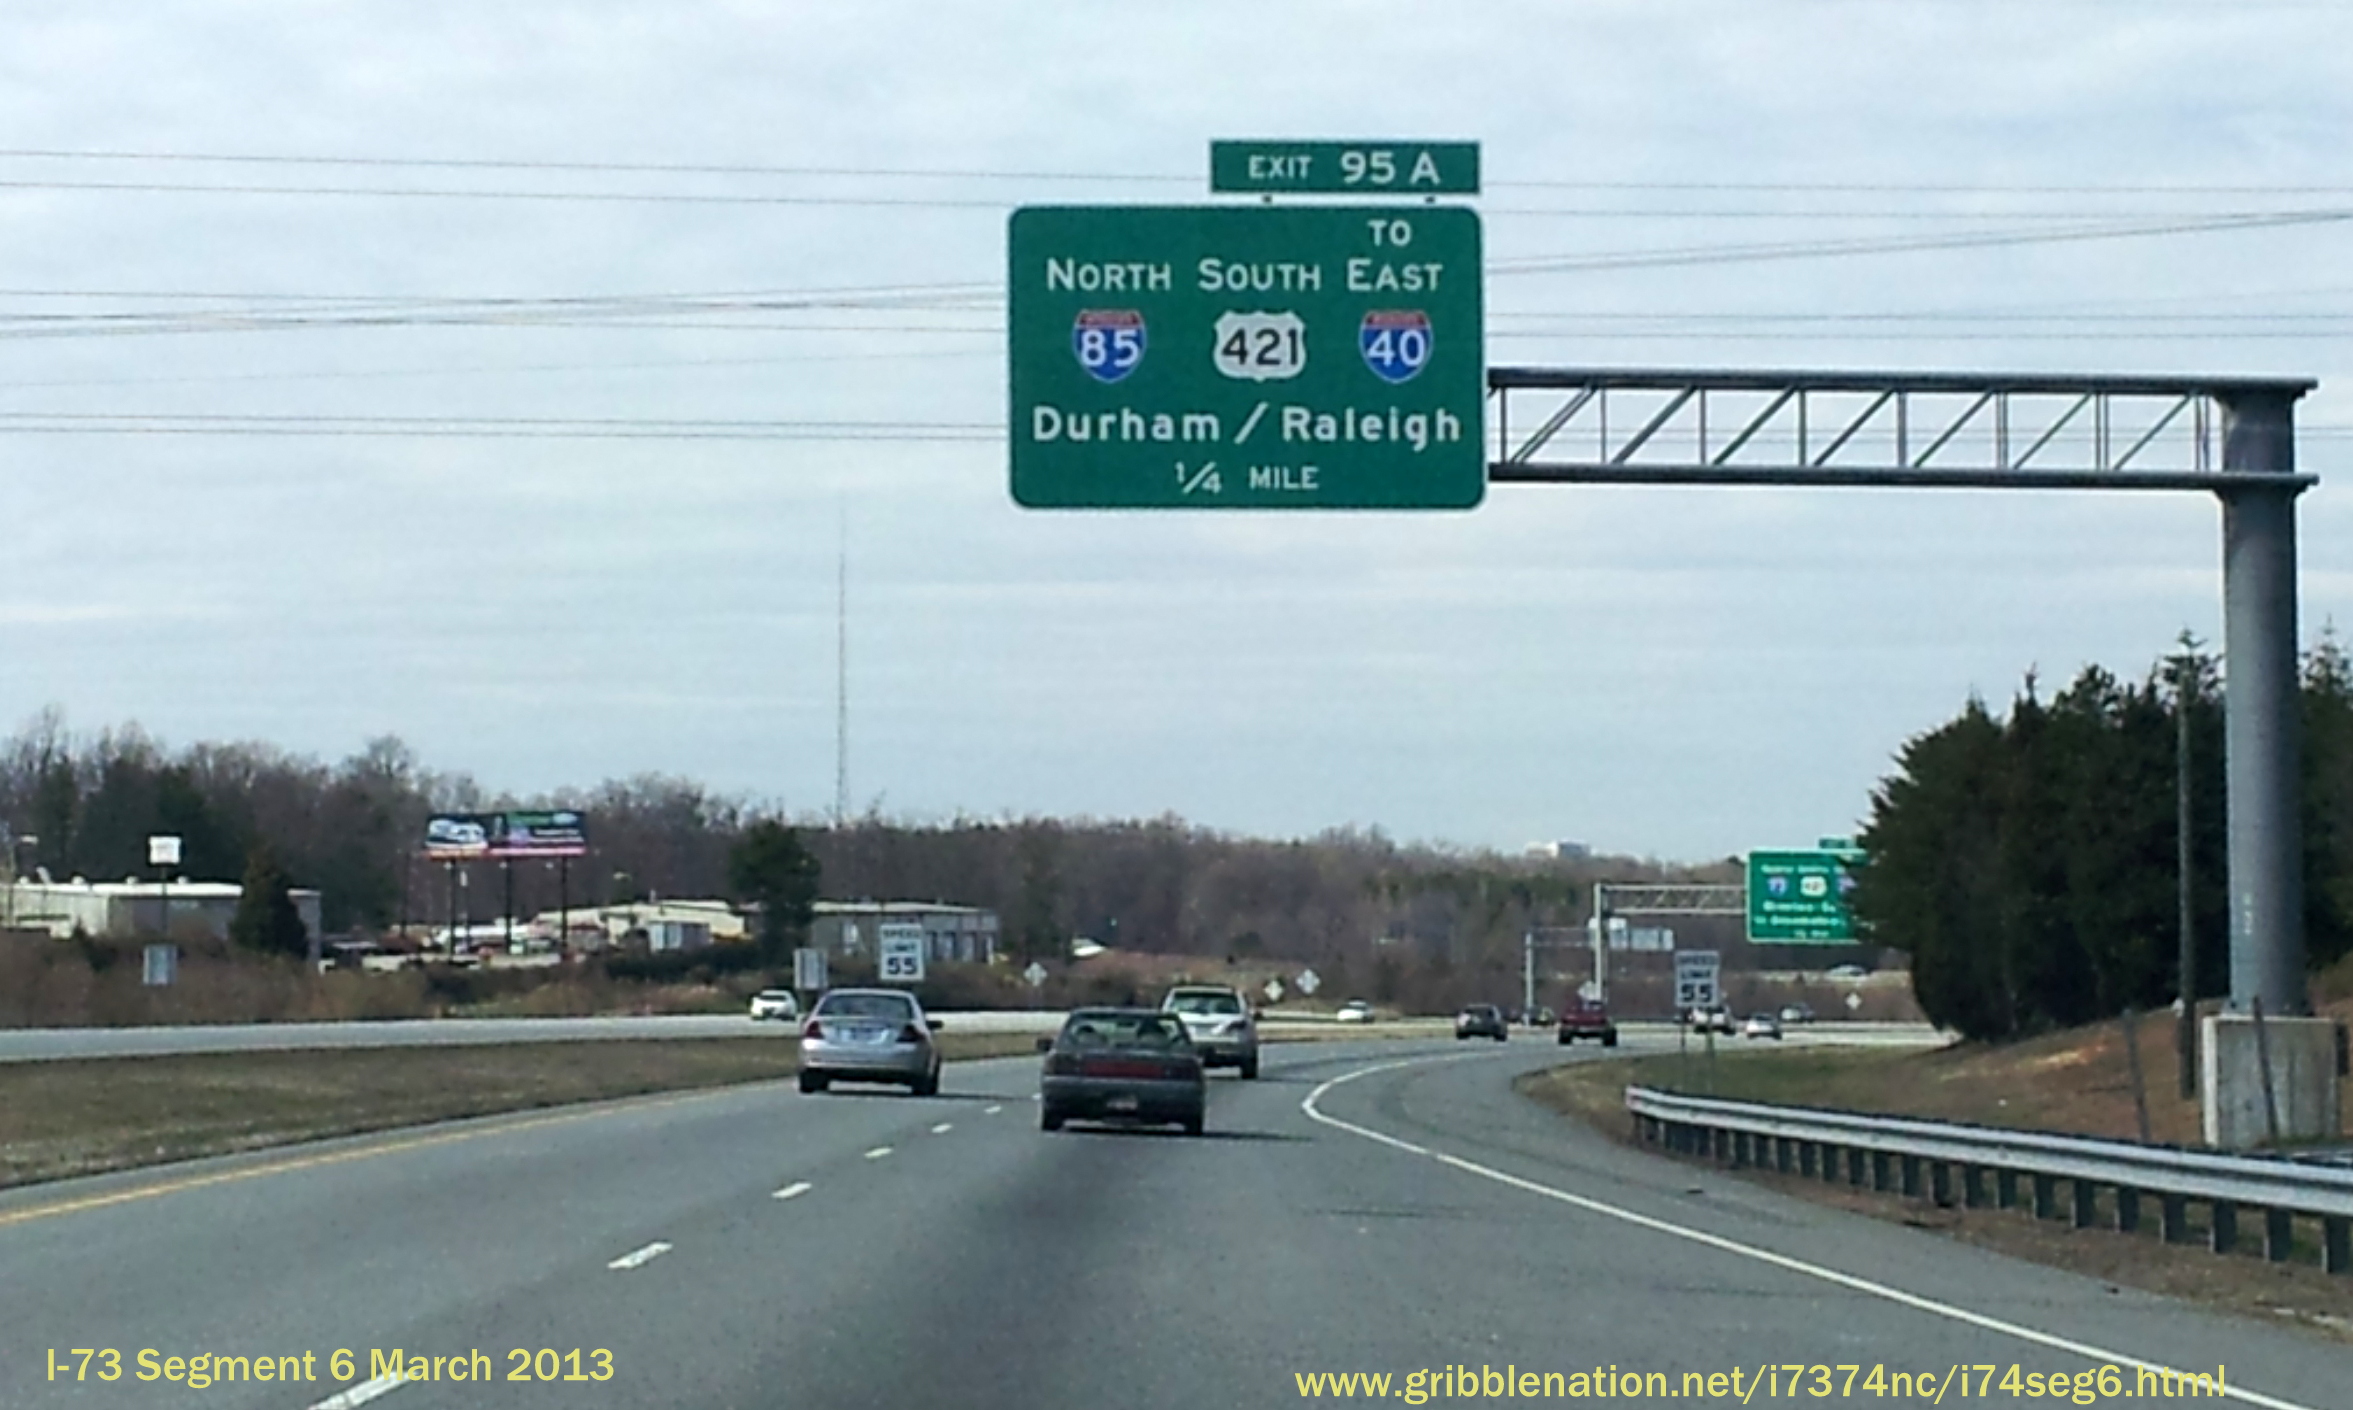 Photo of new I-73 signage for now Exit 95A for I-85 North/US 421 South 
in March 2013, Courtesy of Strider